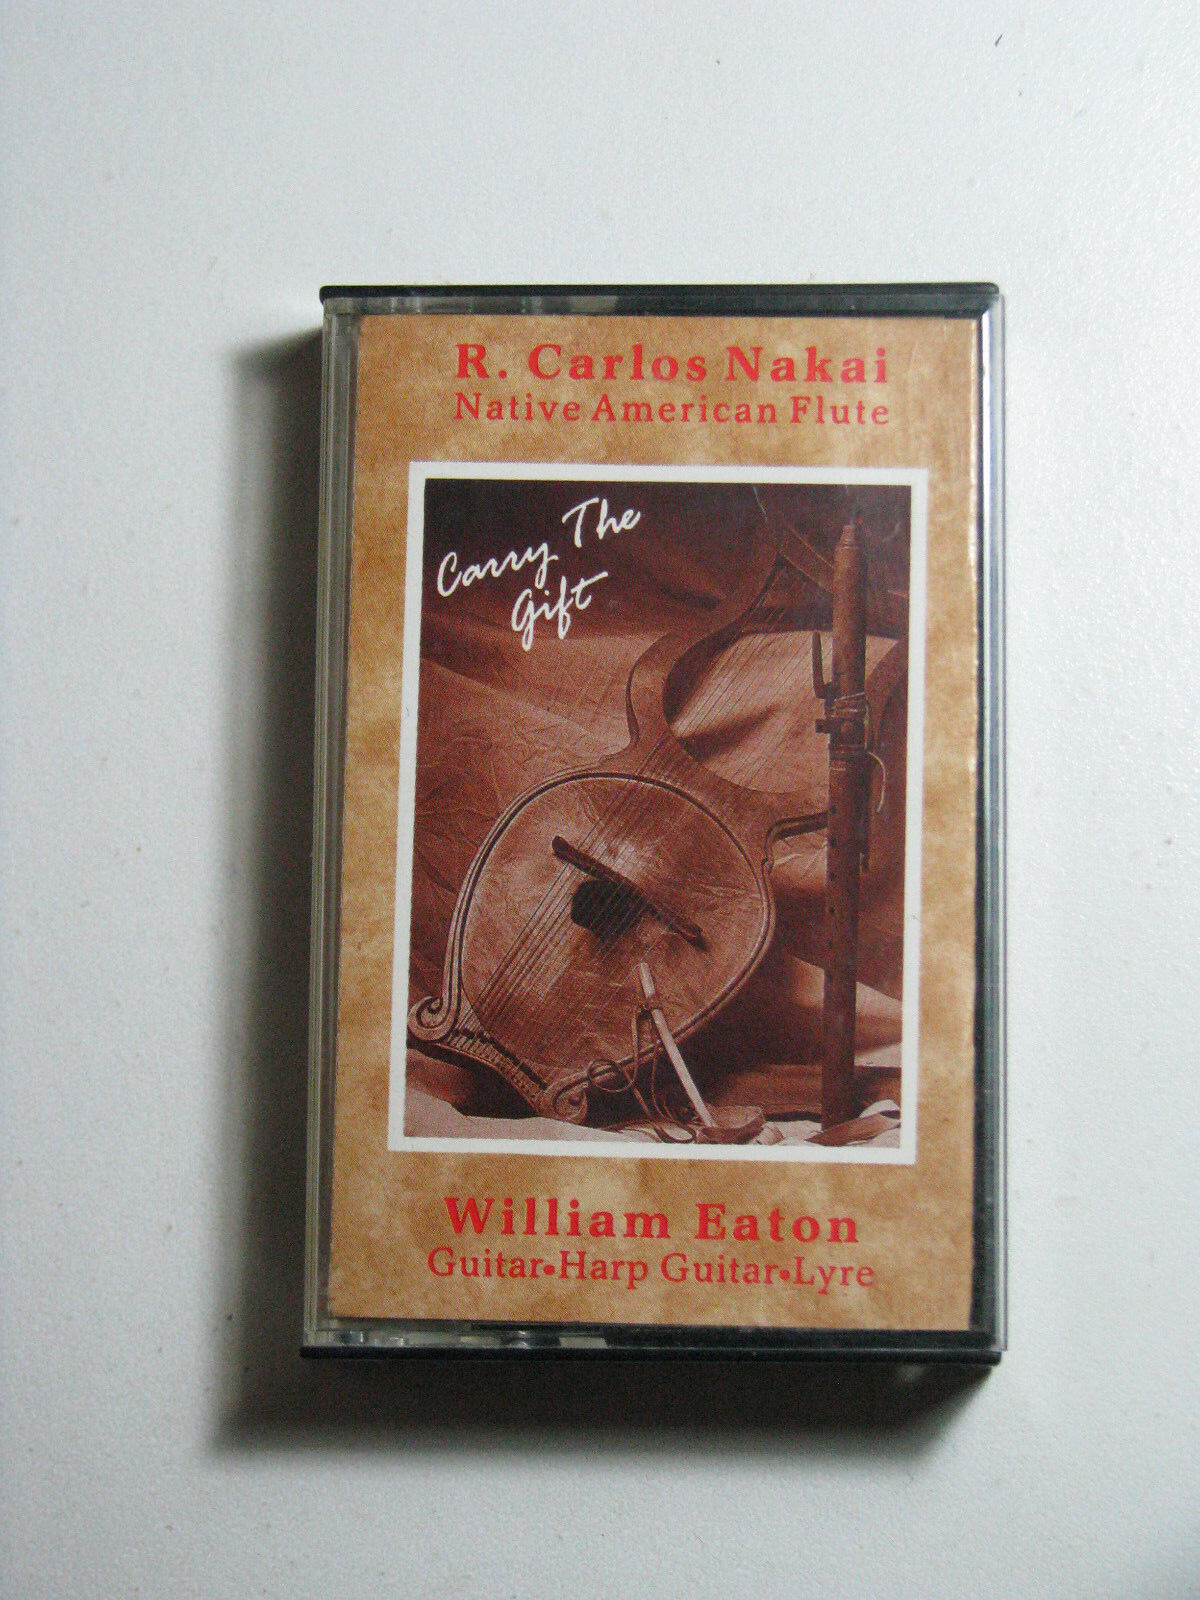 CARRY THE GIFT by R Carlos Nakai & William Eaton 1988 Audio Tape Cassette Native